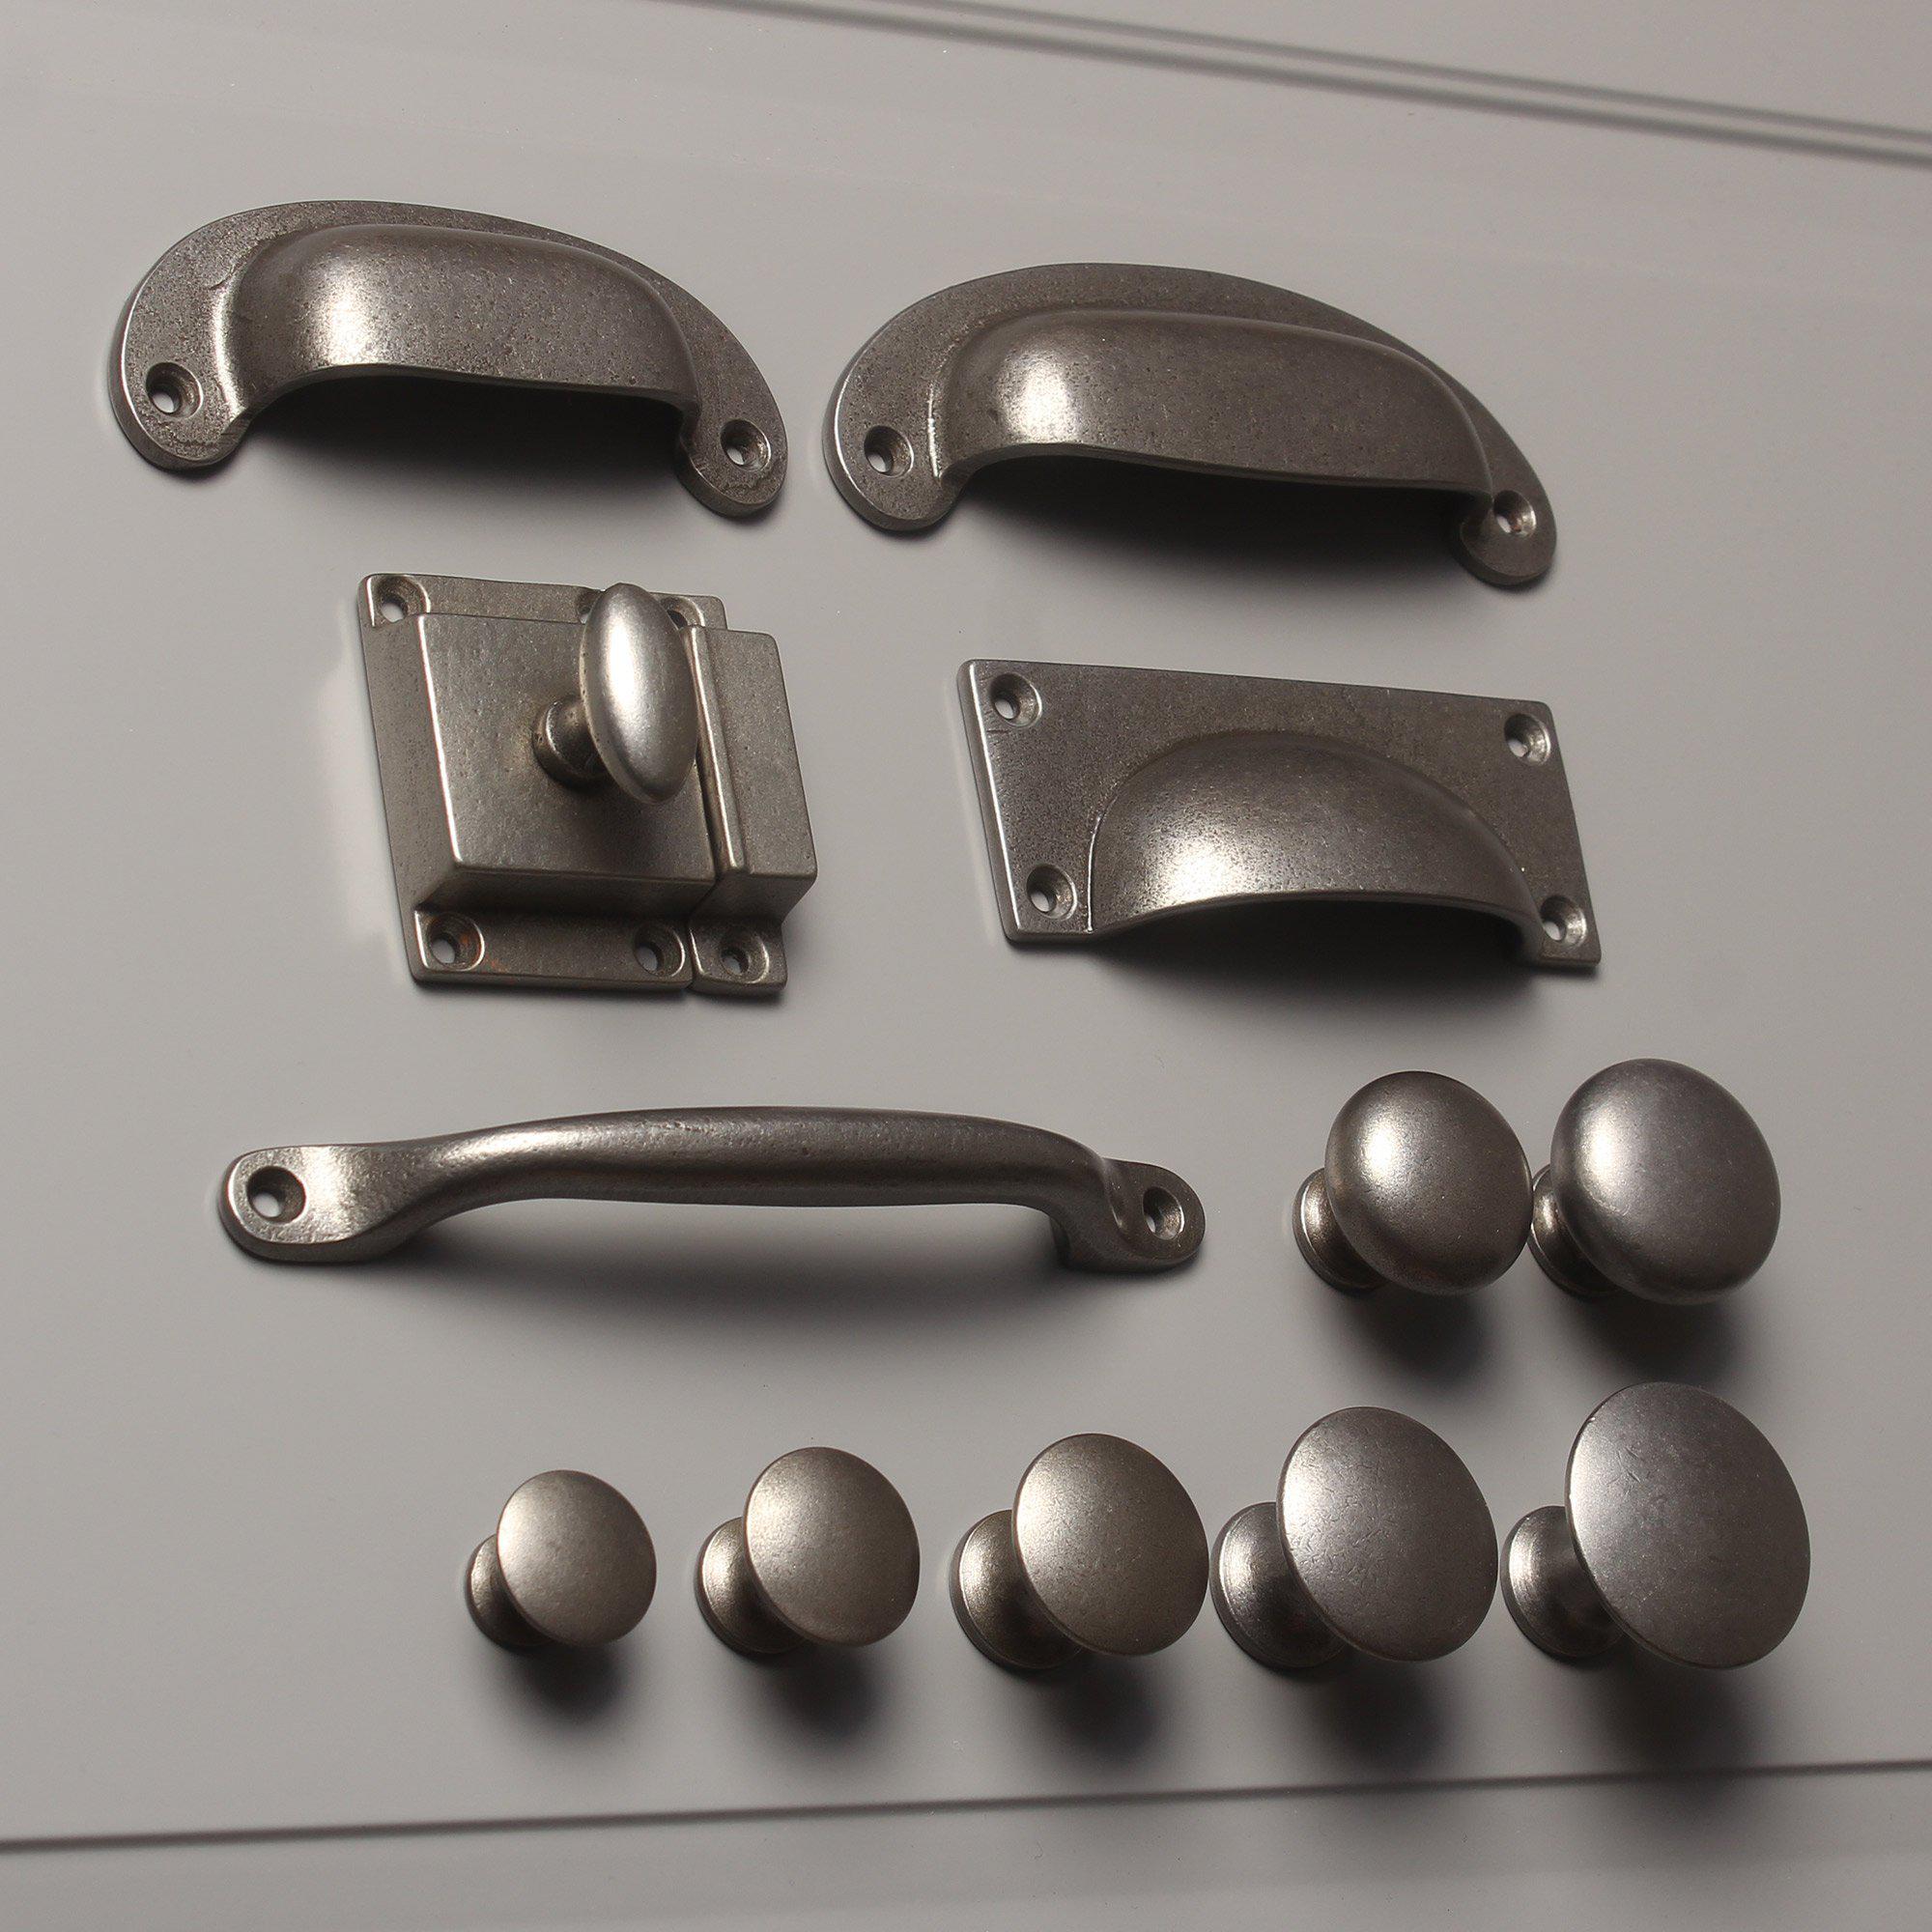 Handles and Knobs, furniture fittings. Venezuela (South America)